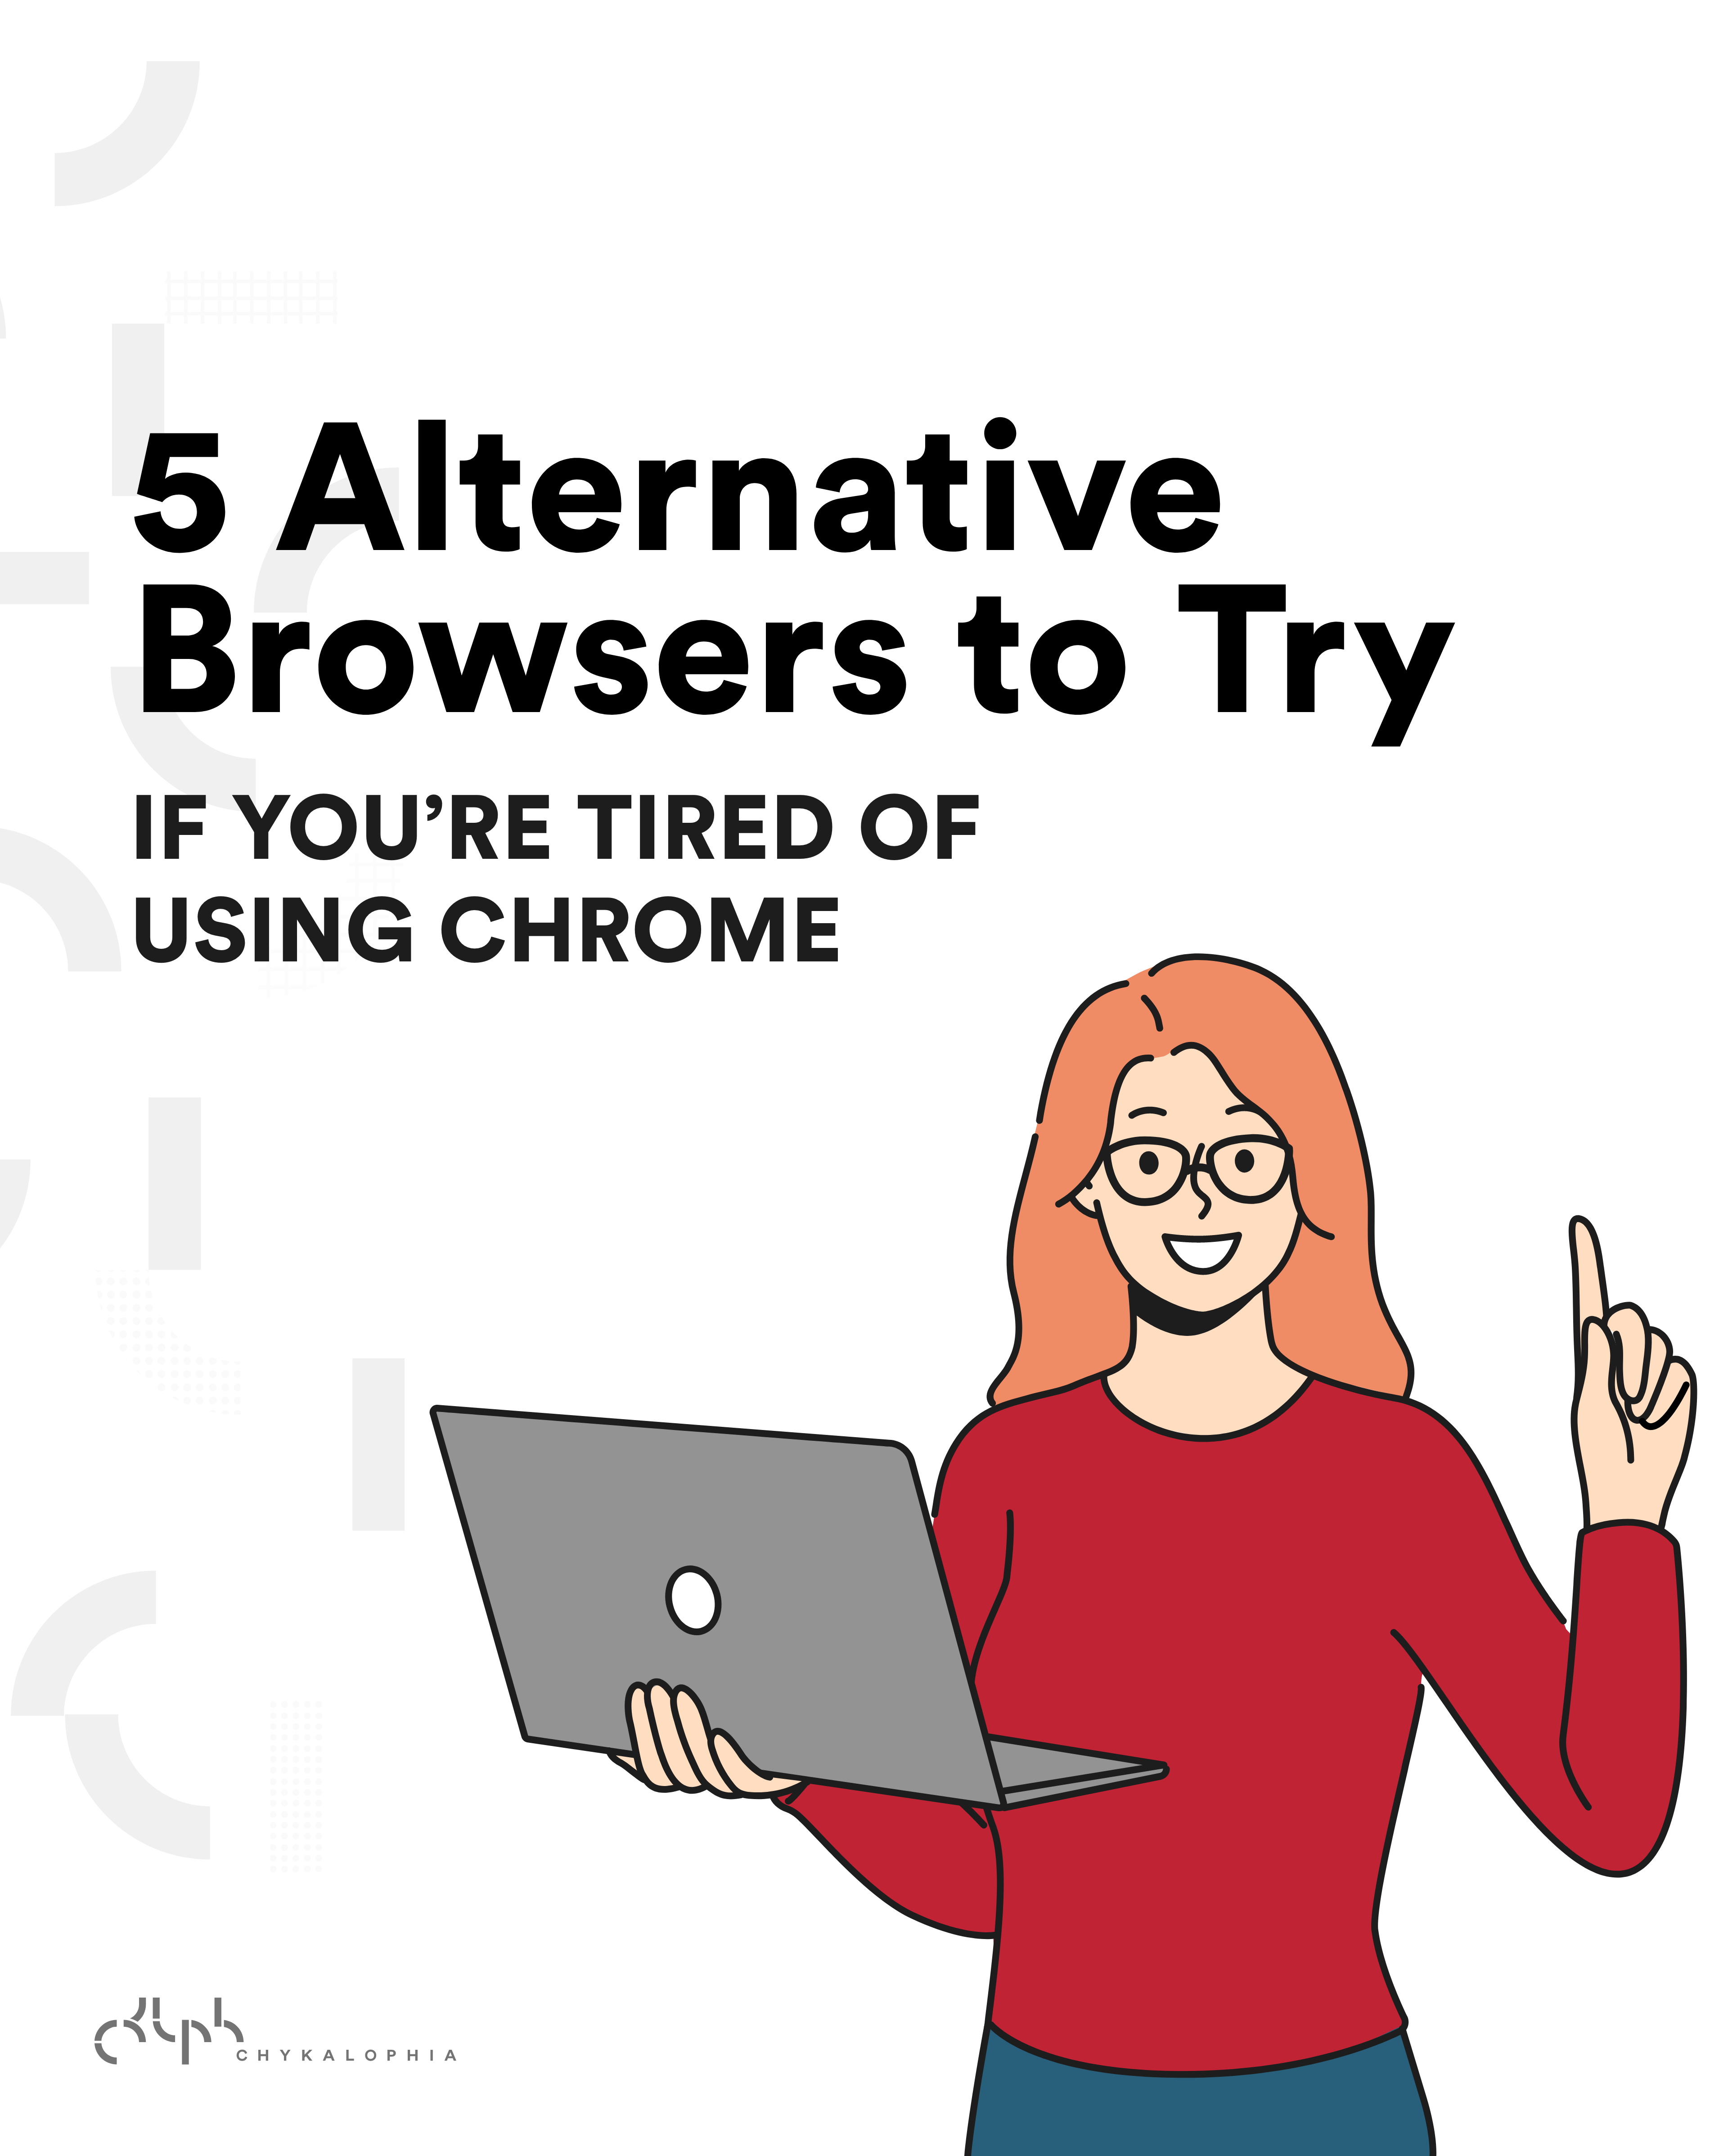 Alternative Browsers. These website browsers are great alternatives to Chrome